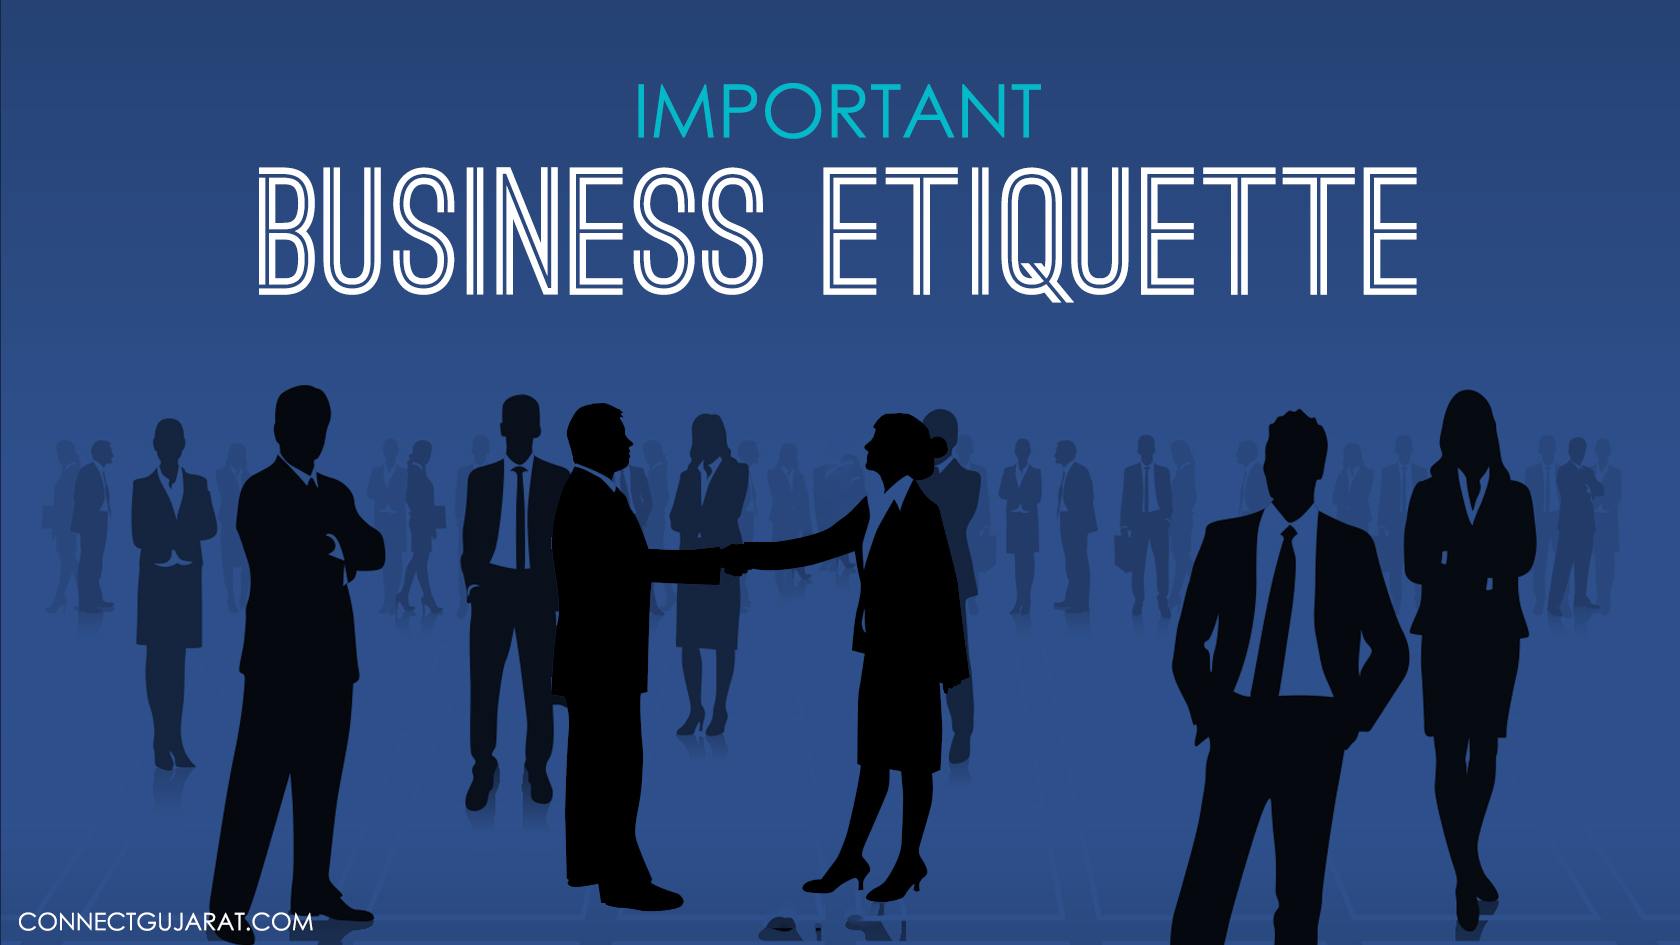 Important business etiquette everyone should be aware of